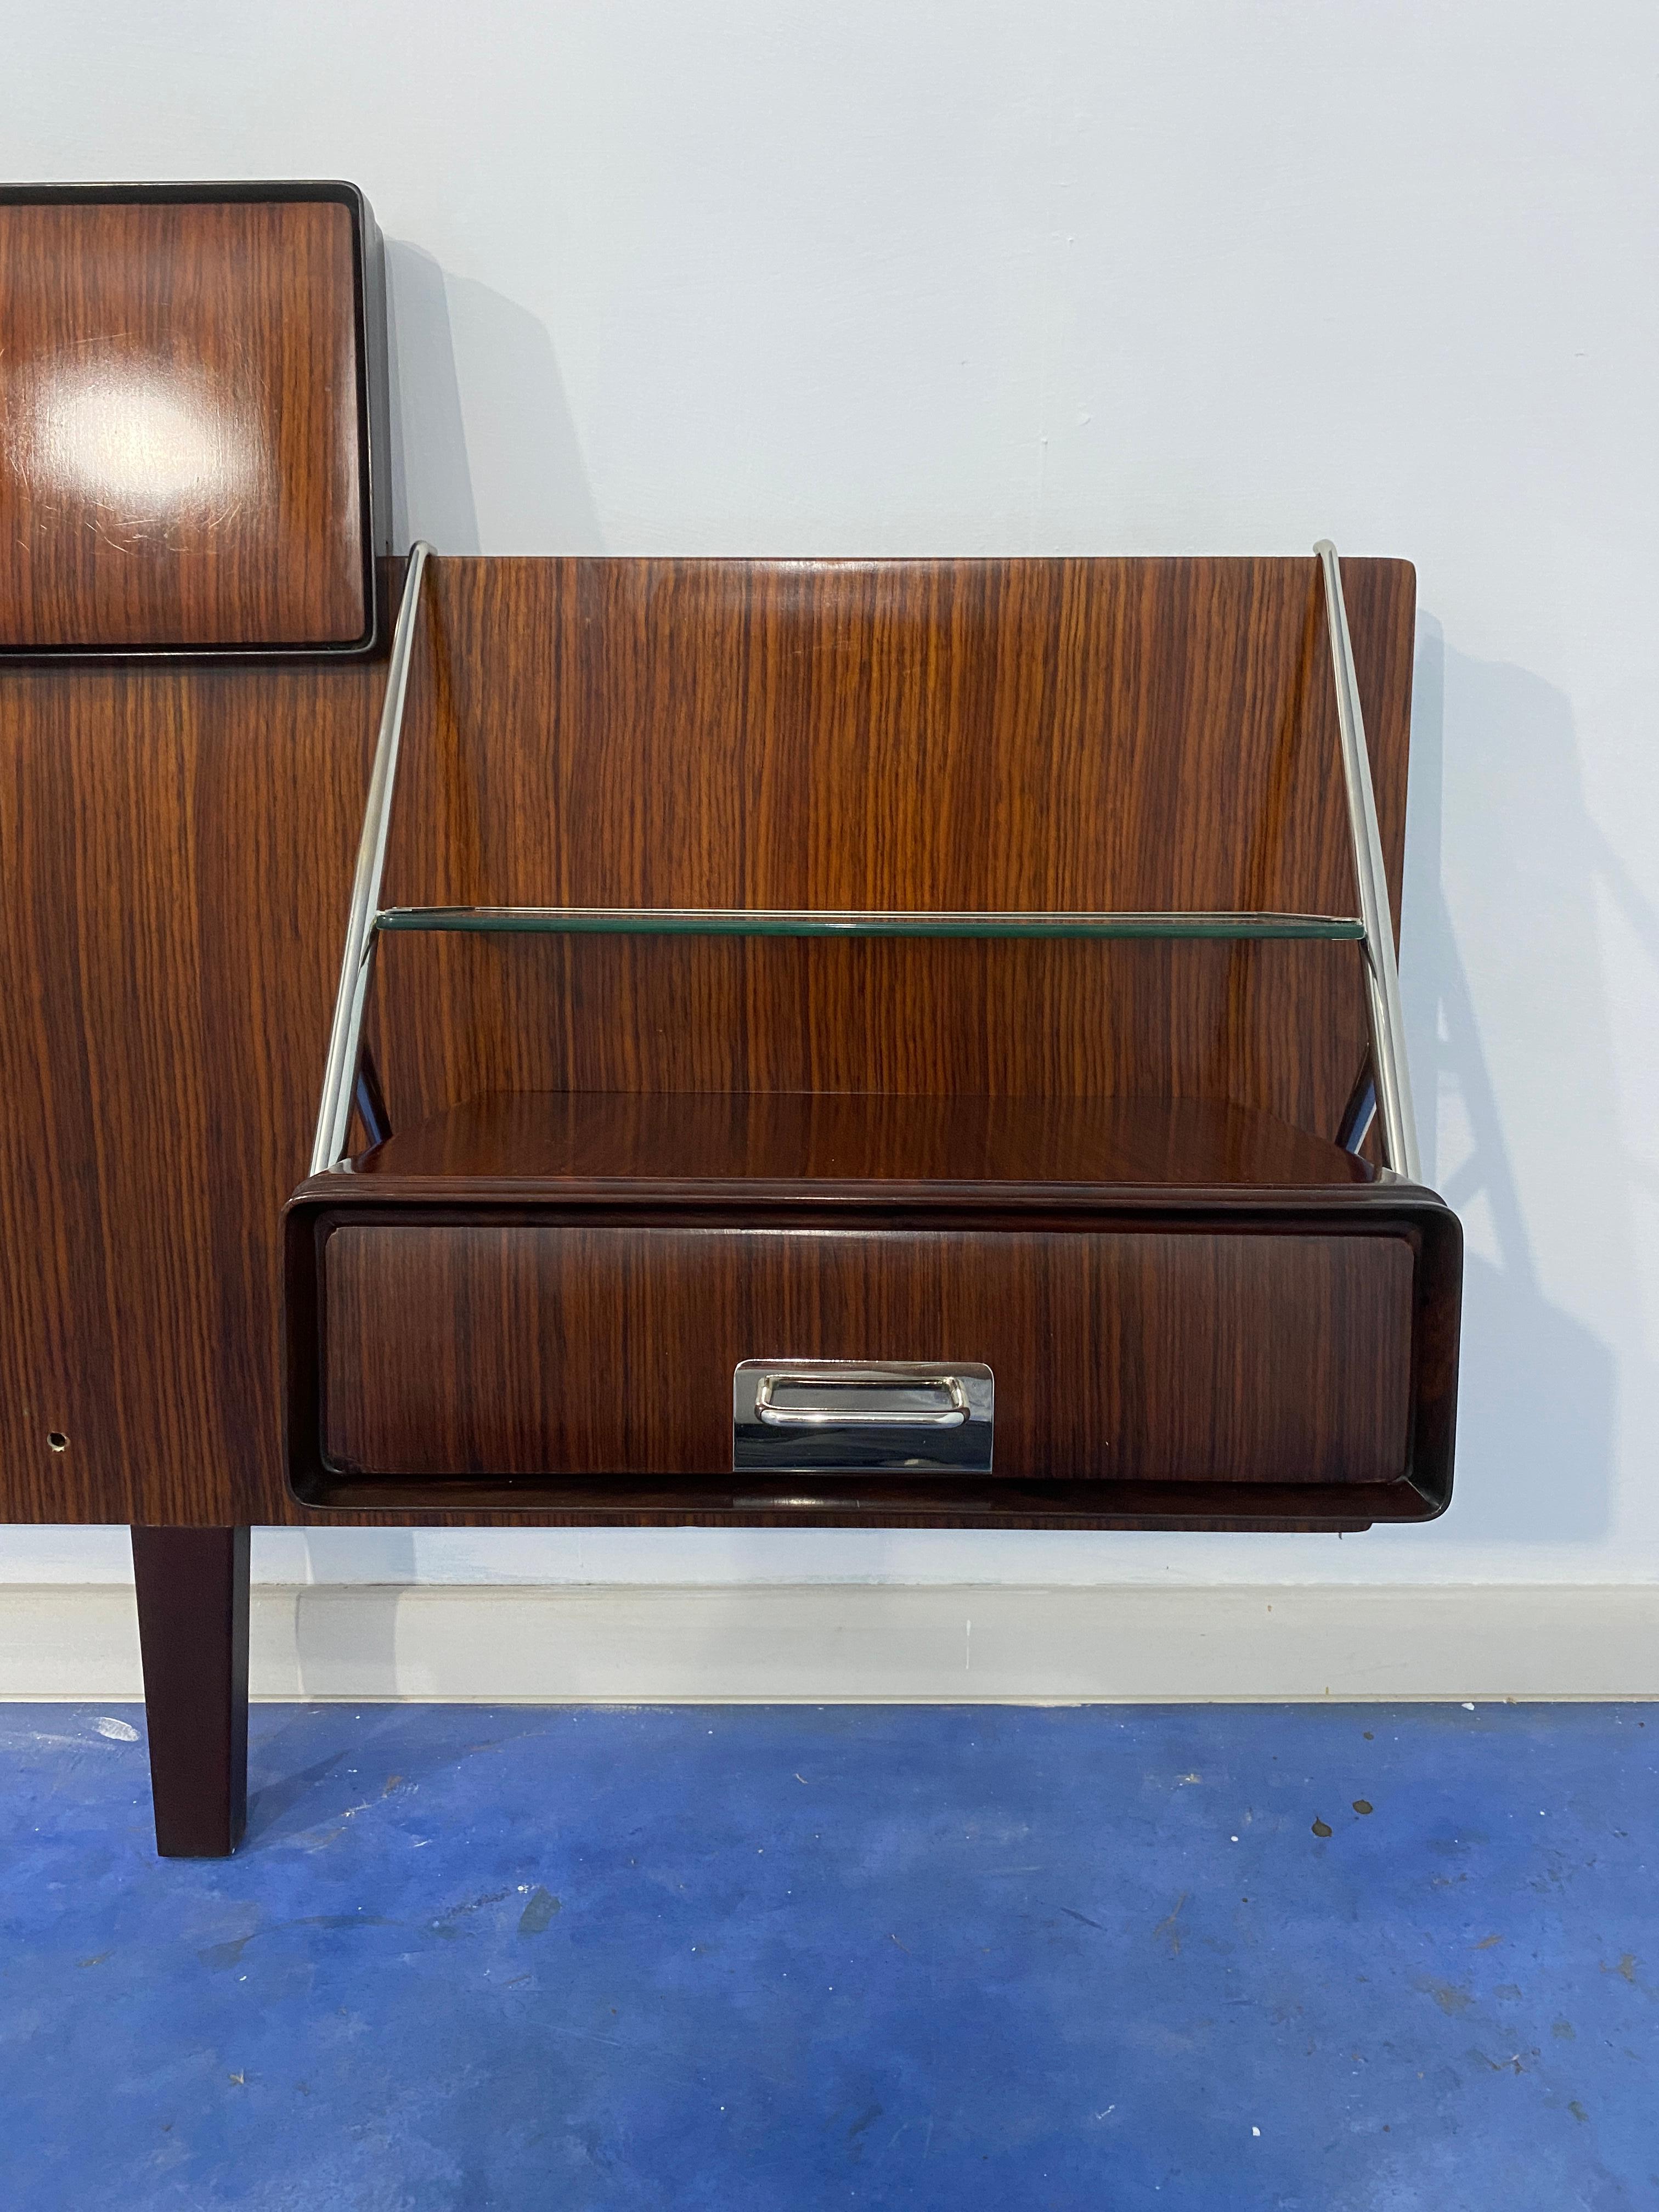 Italian nightstands from the 1950s with headboard bed designed by Silvio Cavatorta 6